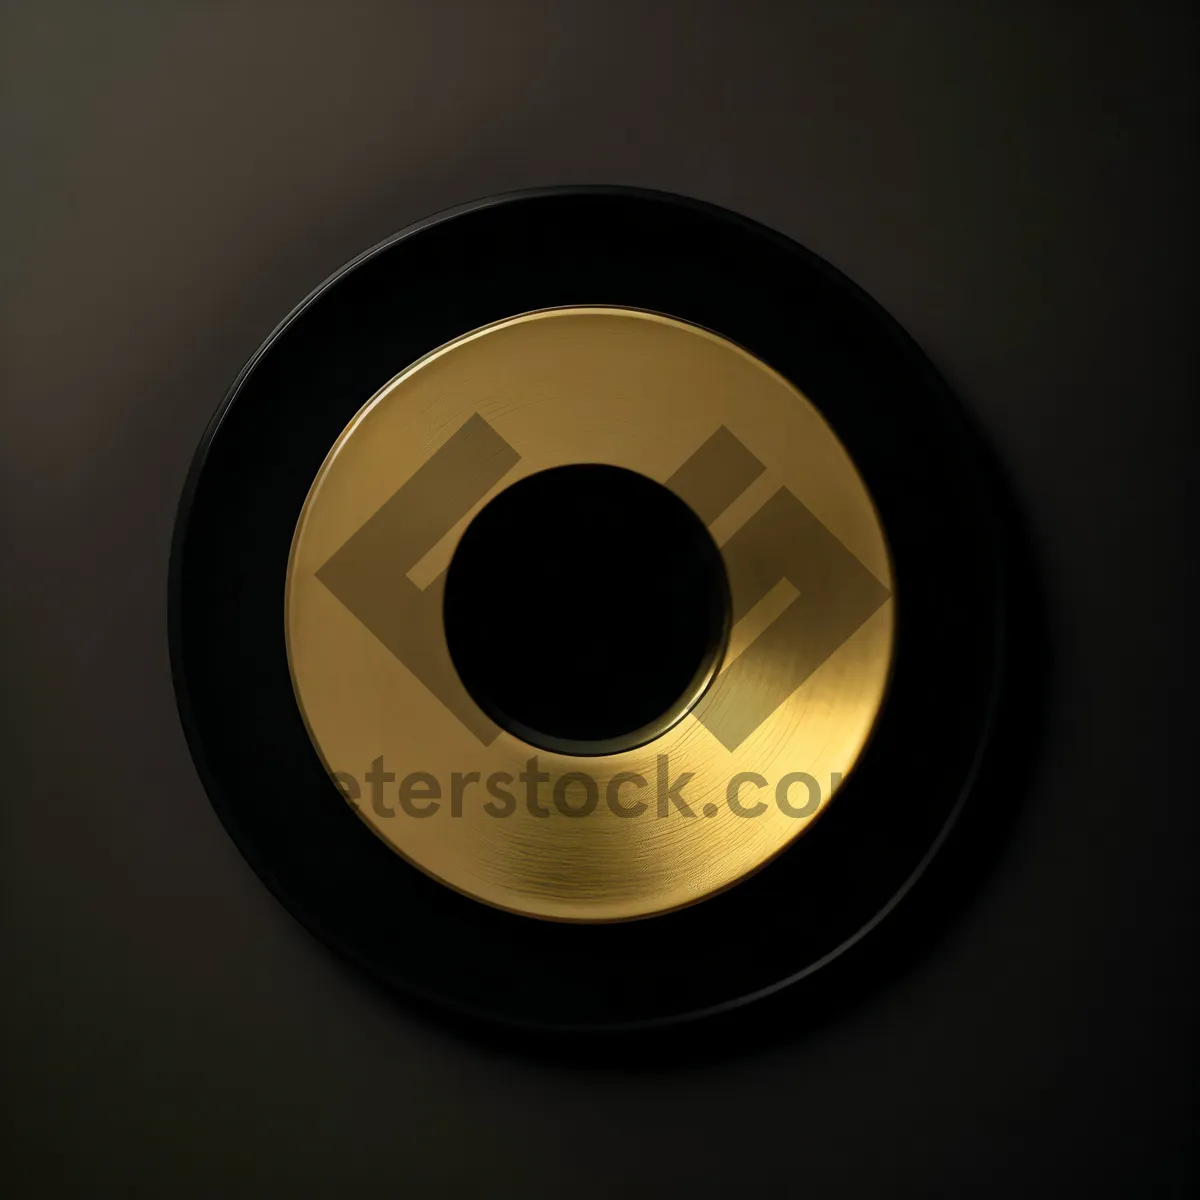 Picture of Acoustic Music Icon: Shiny Black 3D Sound Symbol